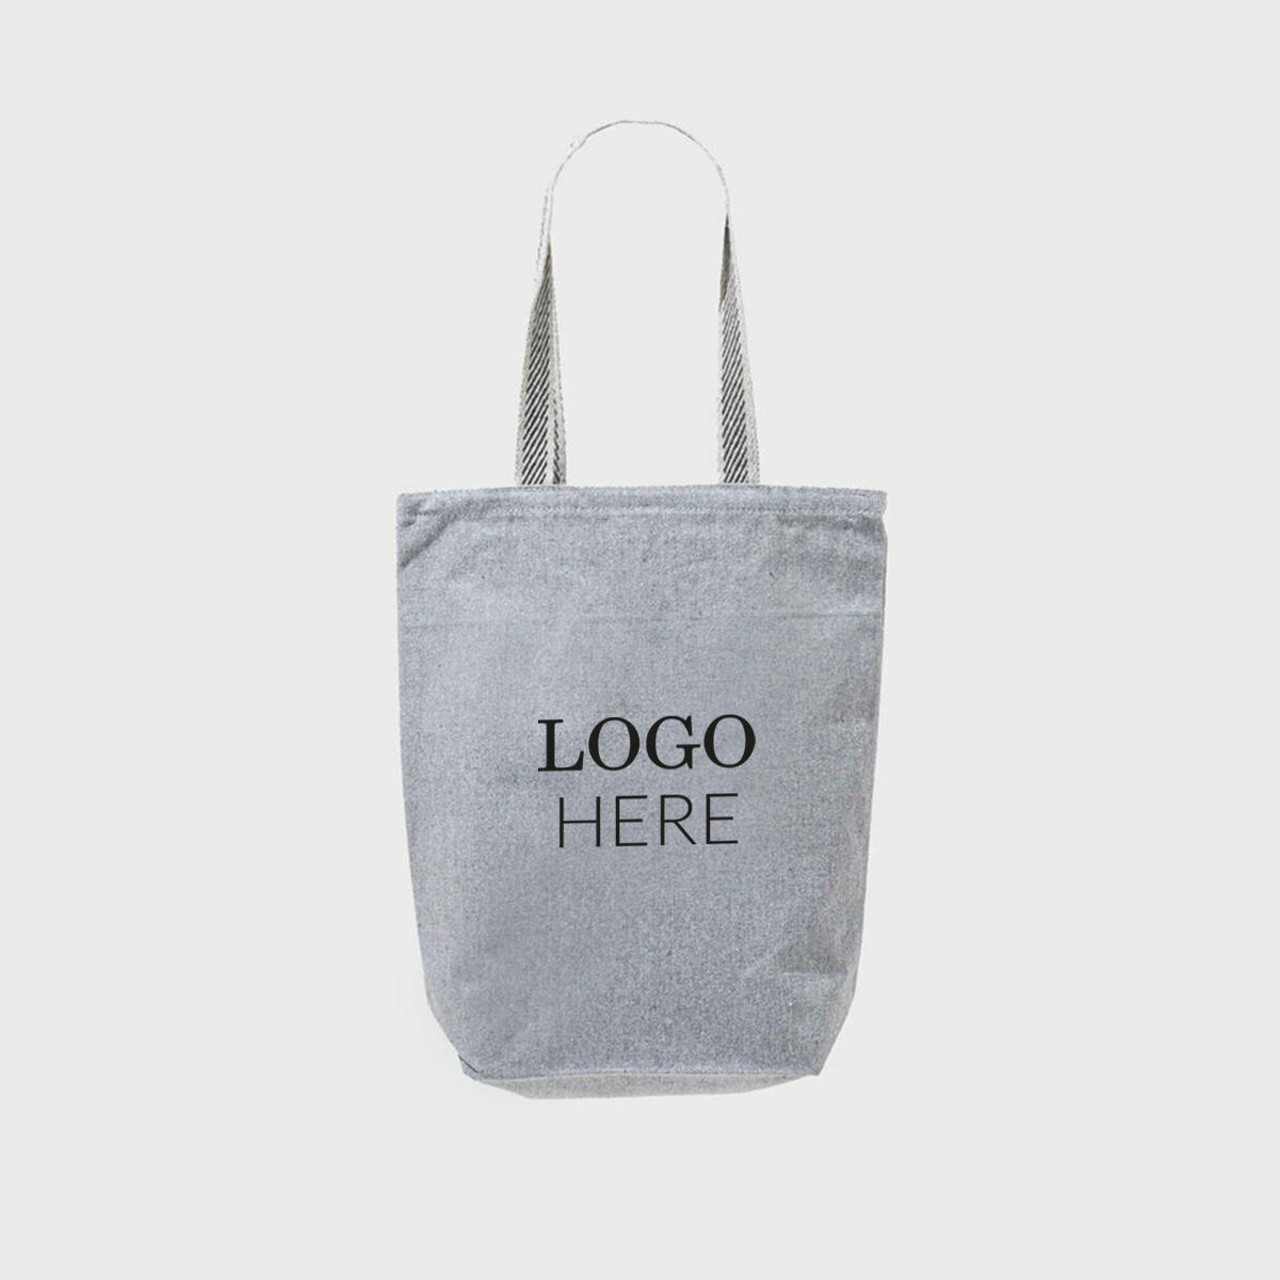 Recycled Canvas Bag With Black Striped Handles